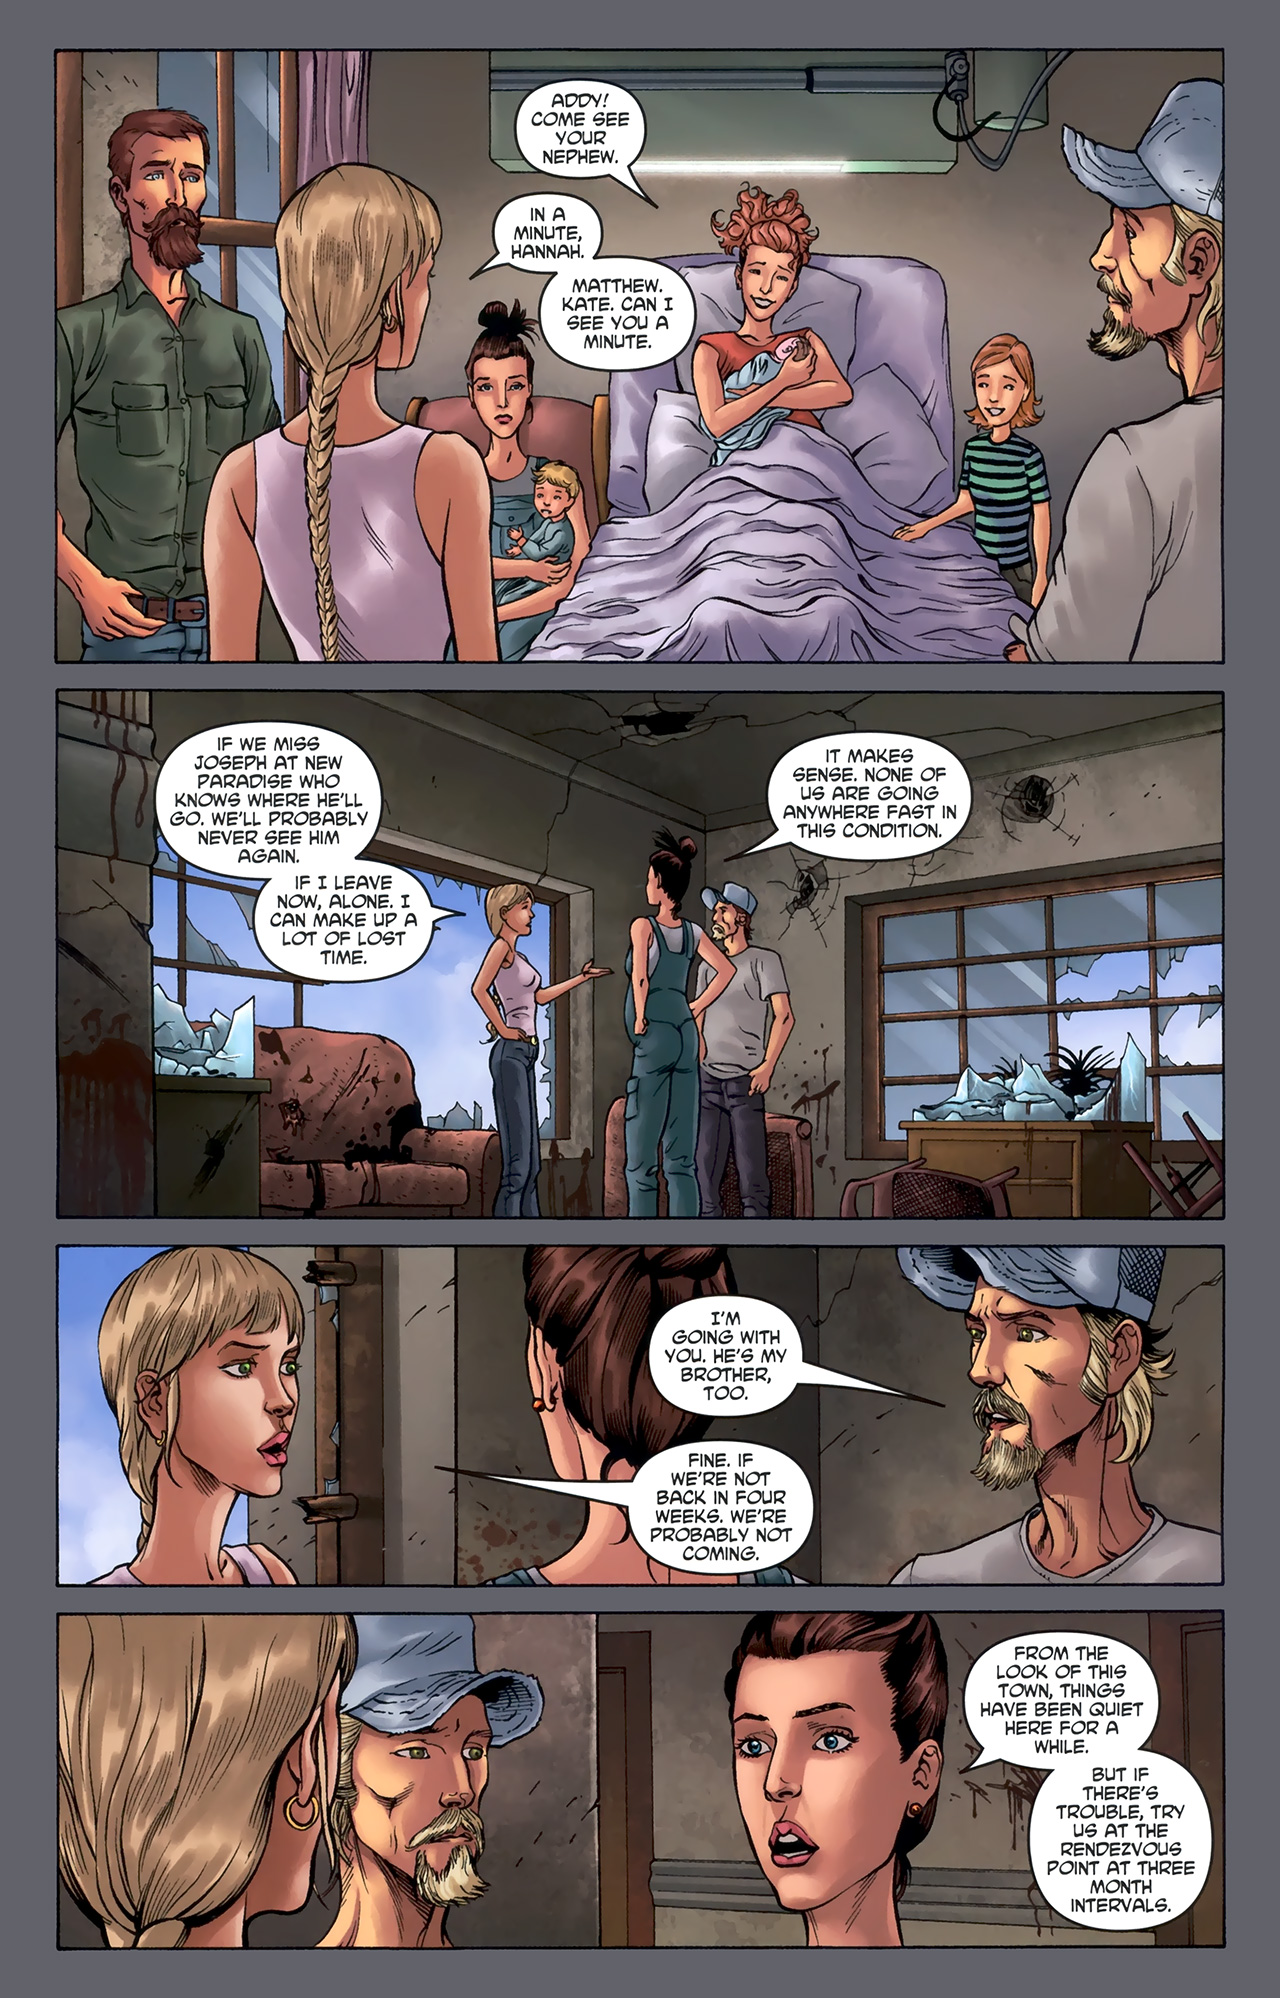 Crossed Family Values - Issue 5 of 7